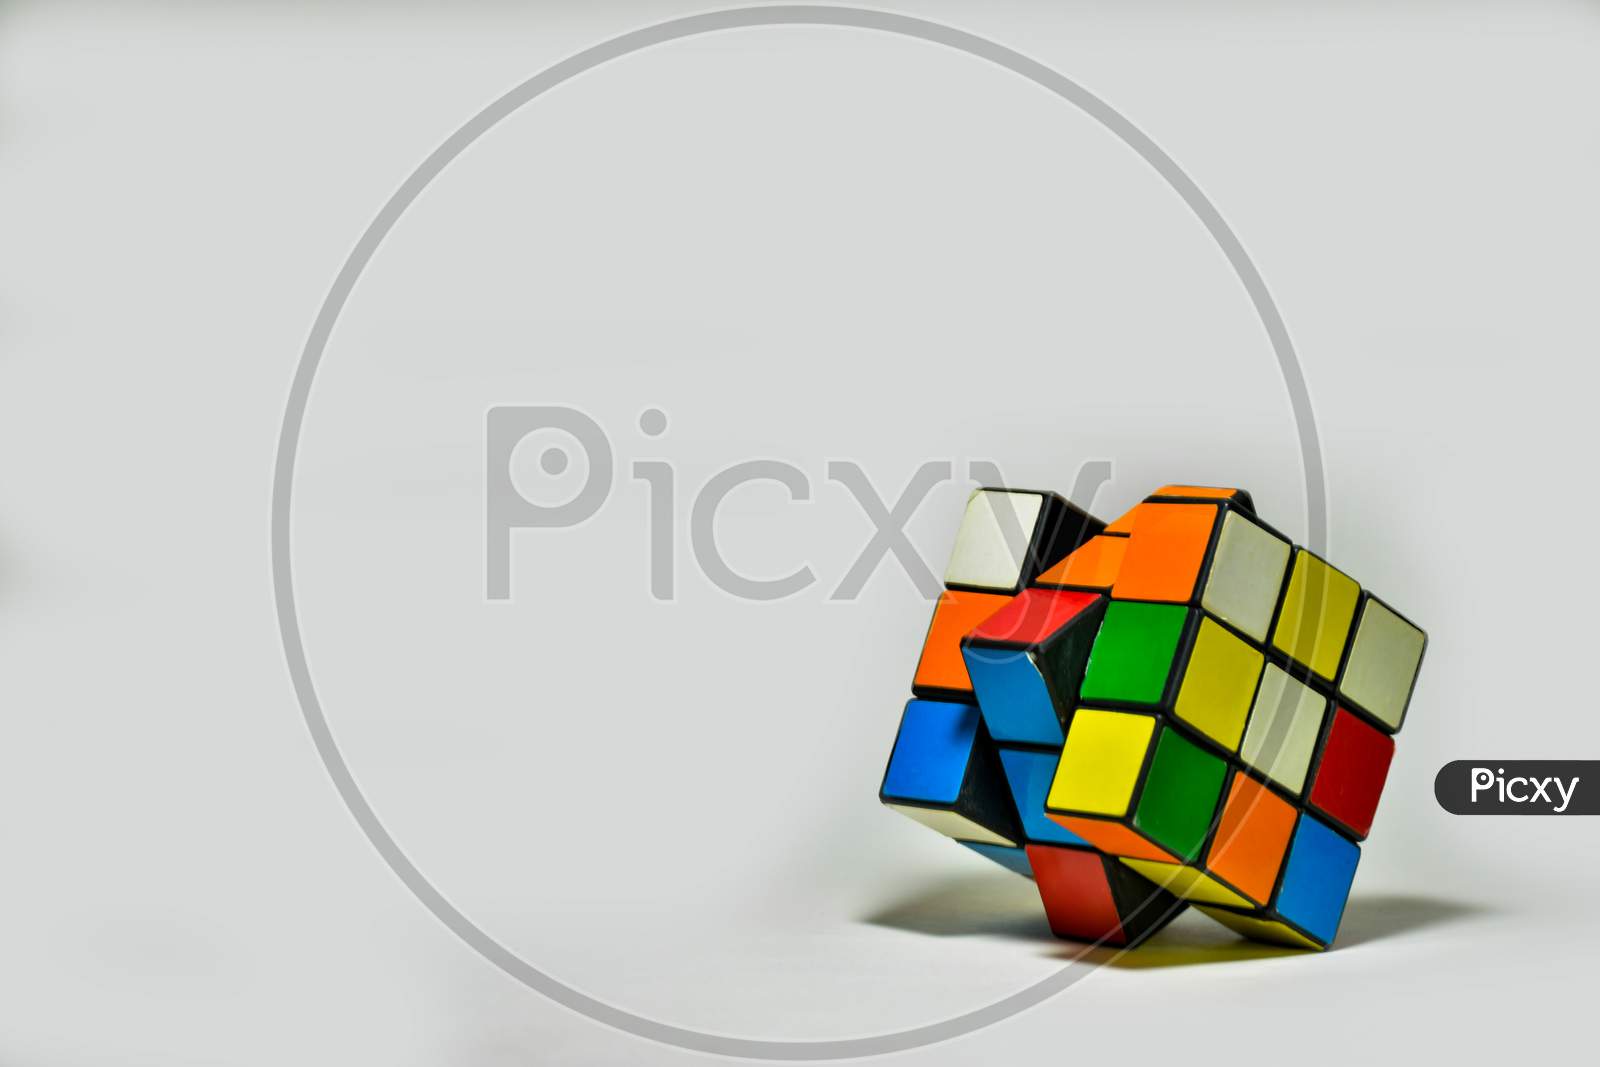 Rubik's Cube Placed Diagonally On A White Background